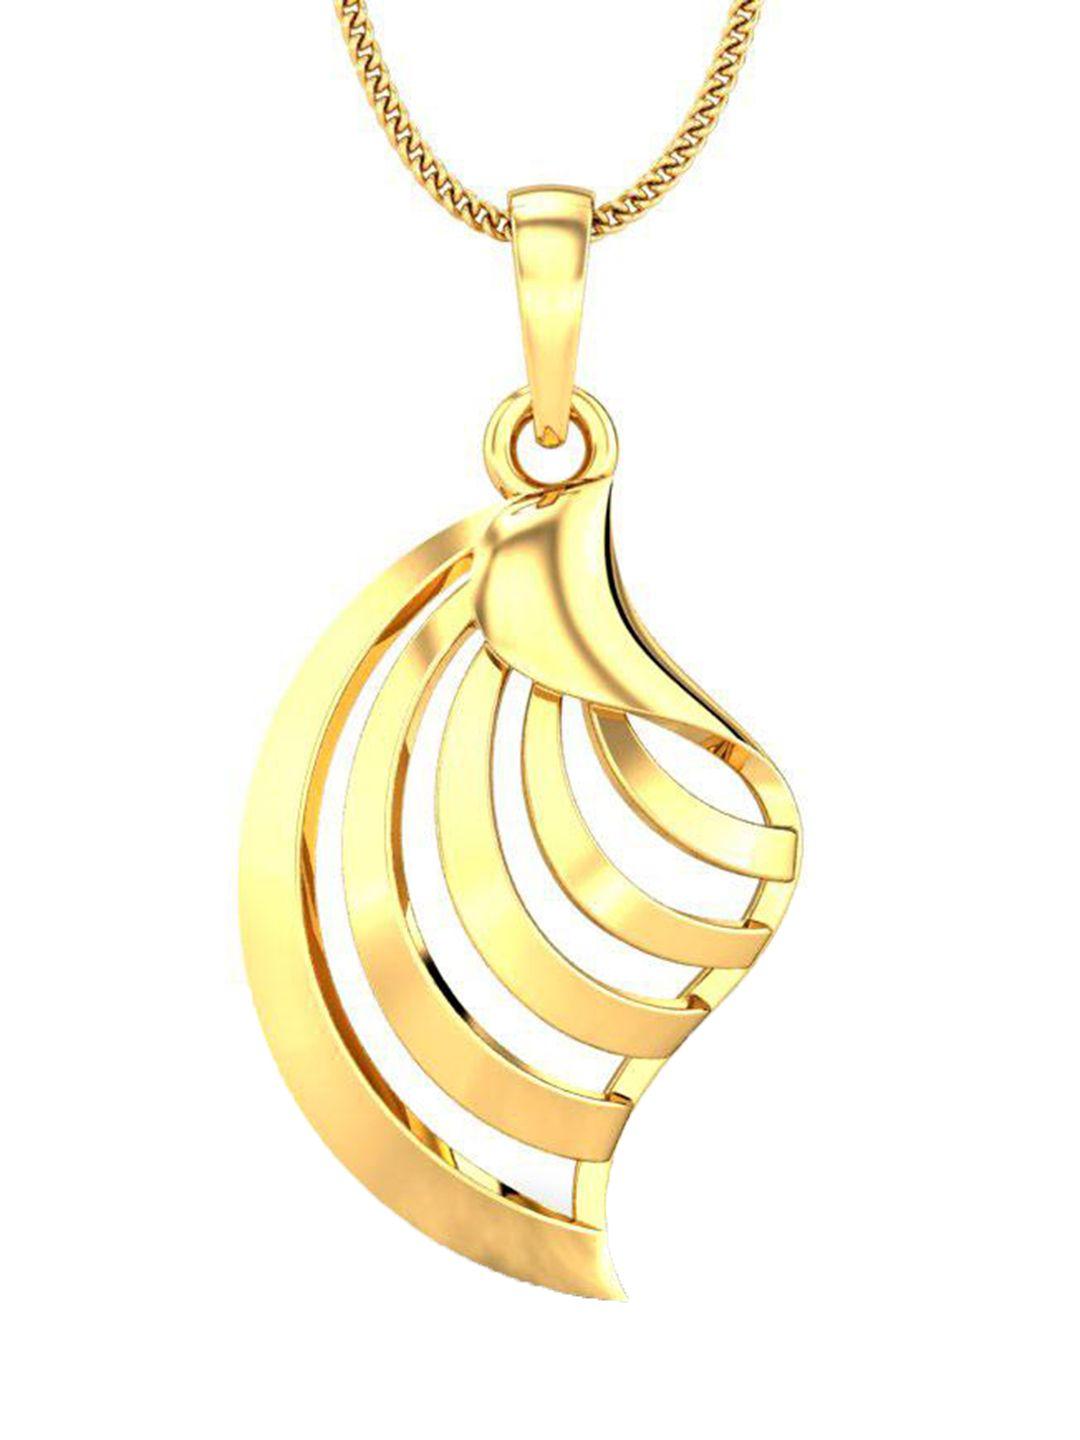 candere-a-kalyan-jewellers-company-18kt-gold-pendant-1.14gm